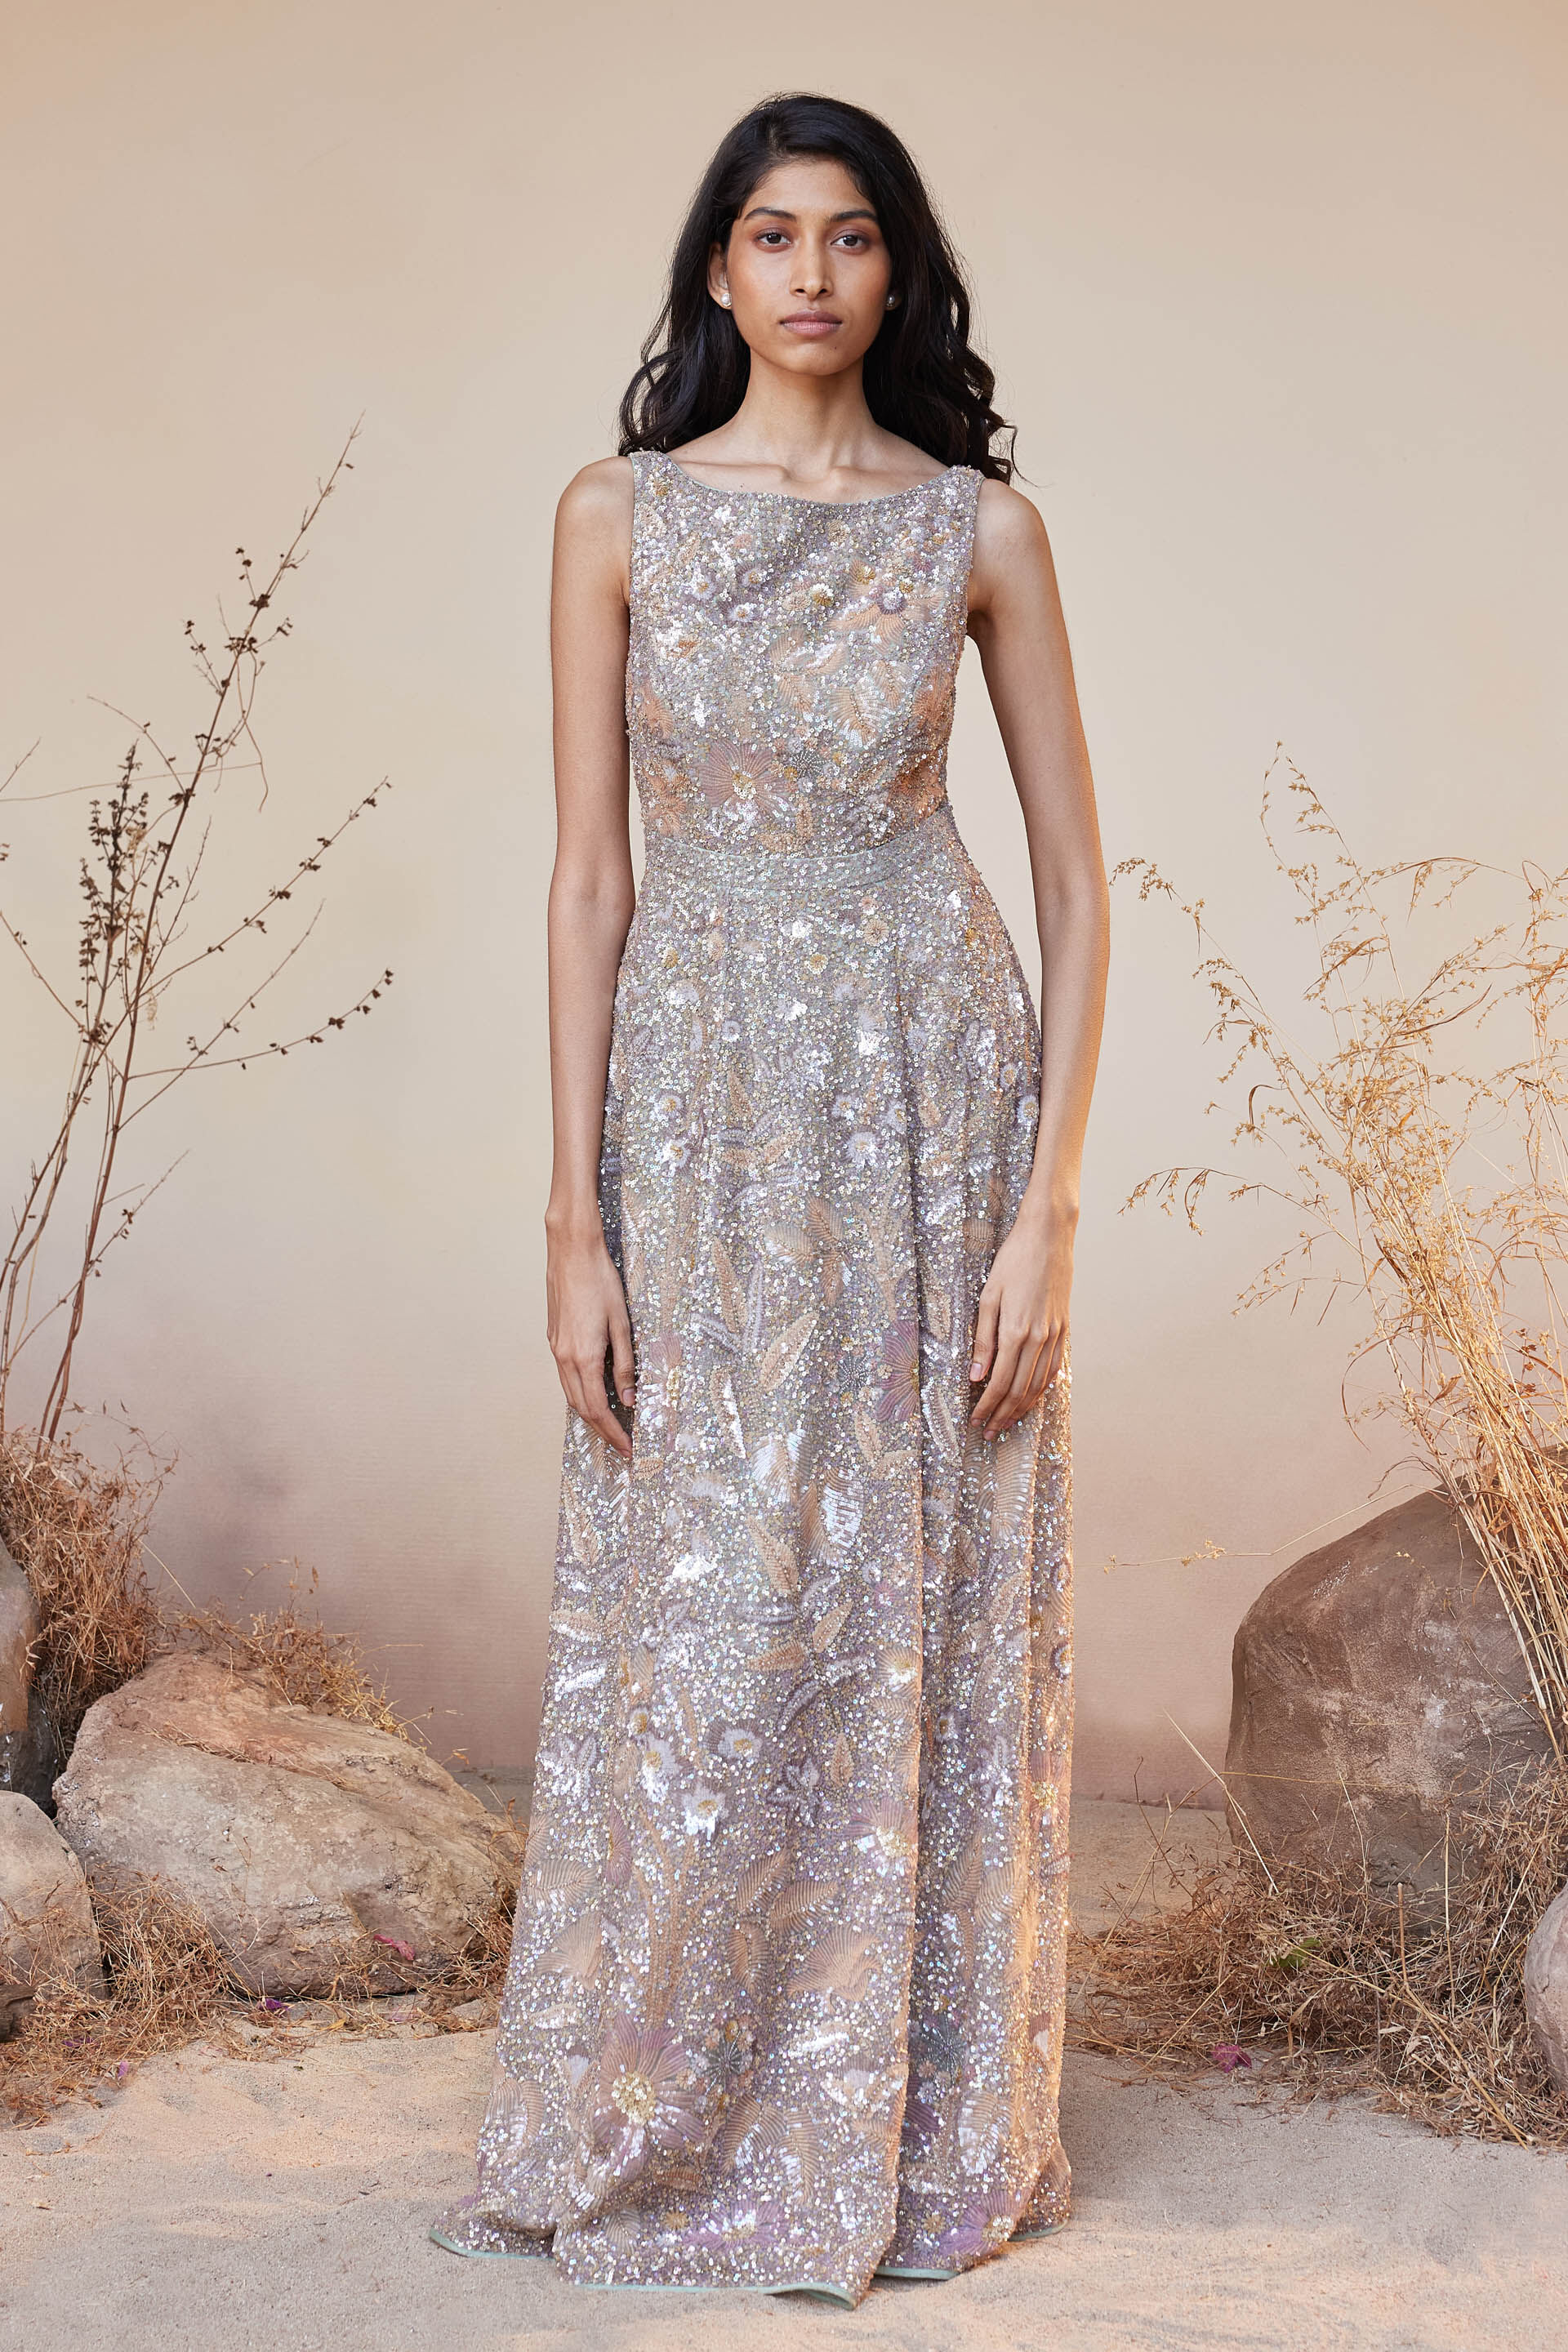 Gowns गउन  Explore from a wide collection of Gown Design Online at  Myntra